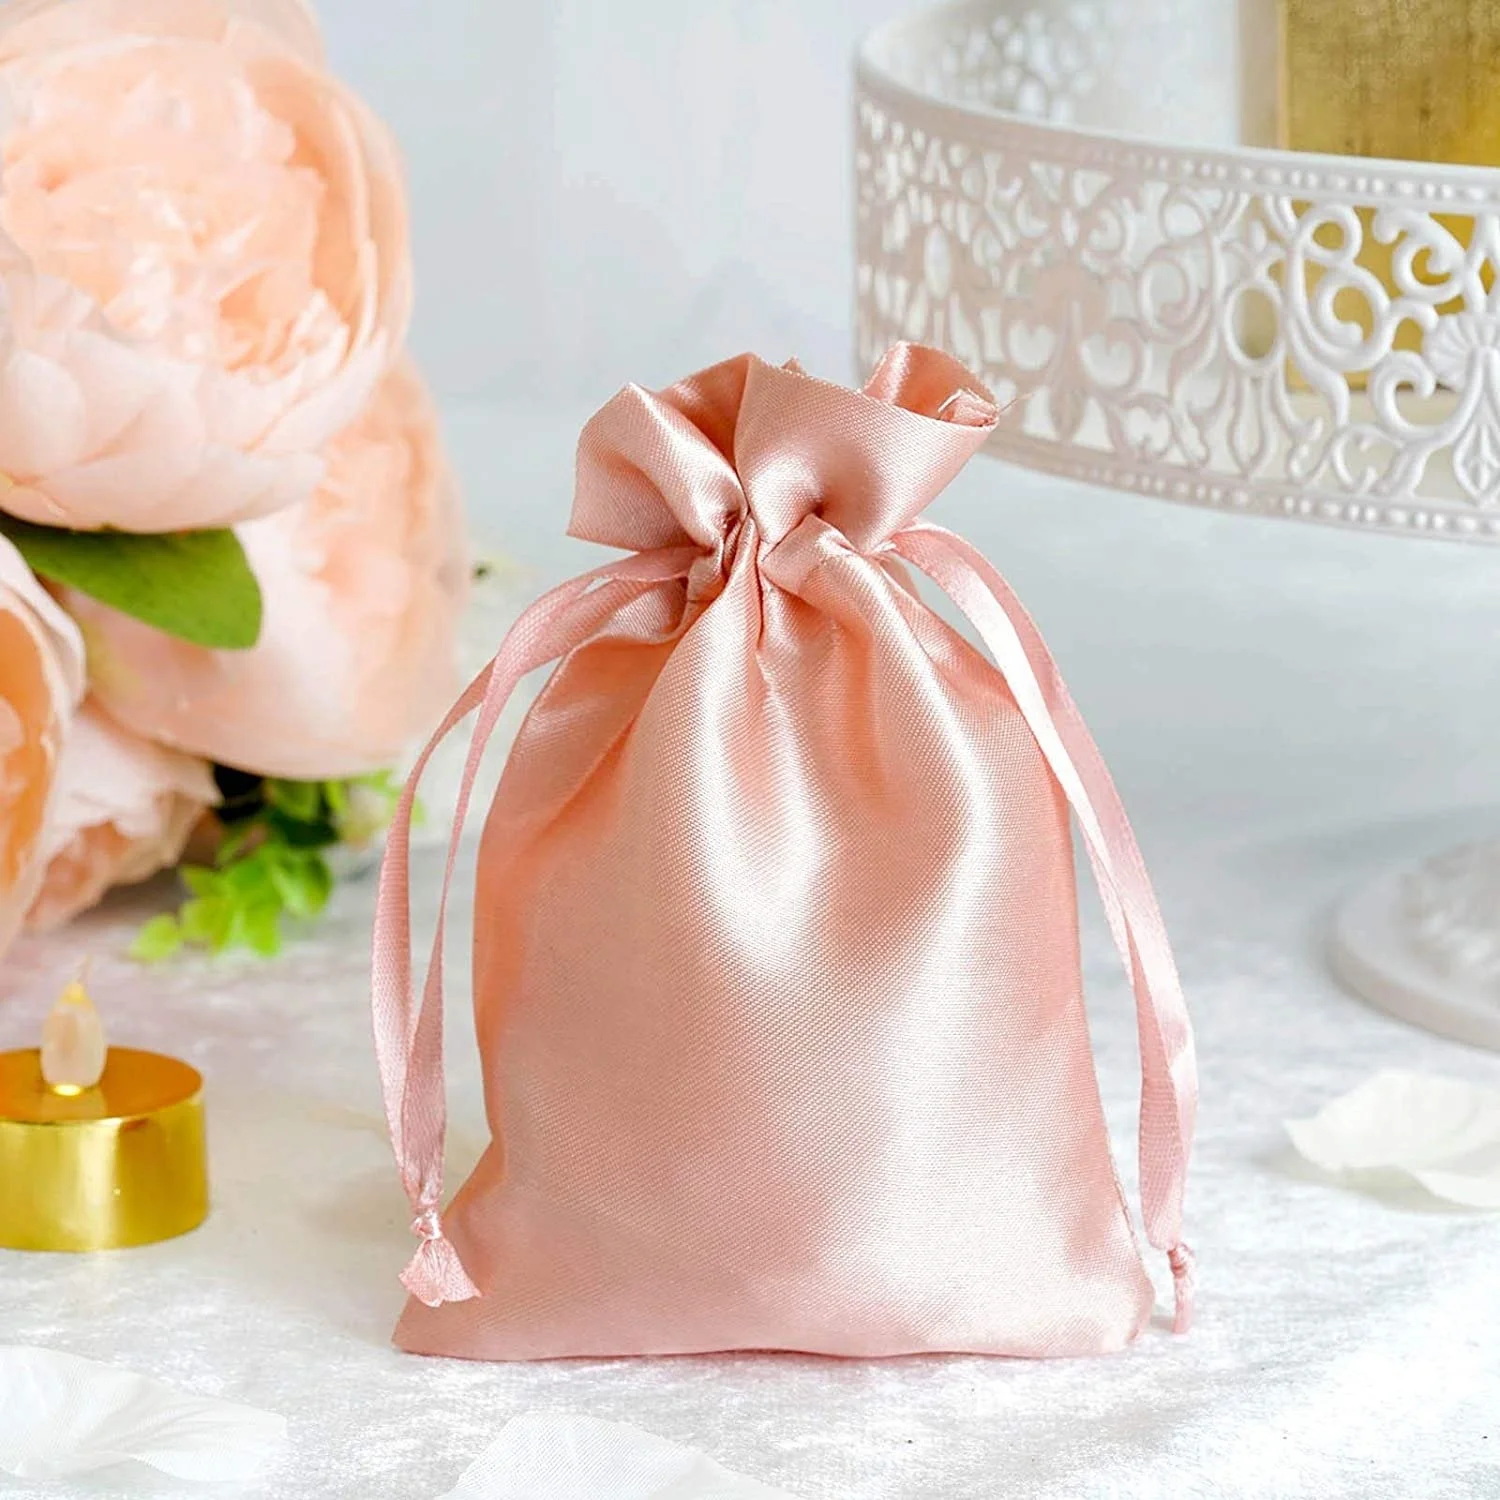 

Dusty Rose Satin Gift Bag Drawstring Pouch Wedding Favors Bridal Shower Candy Jewelry Bags, Black, blue, green, grey, pink, white, yellow, etc